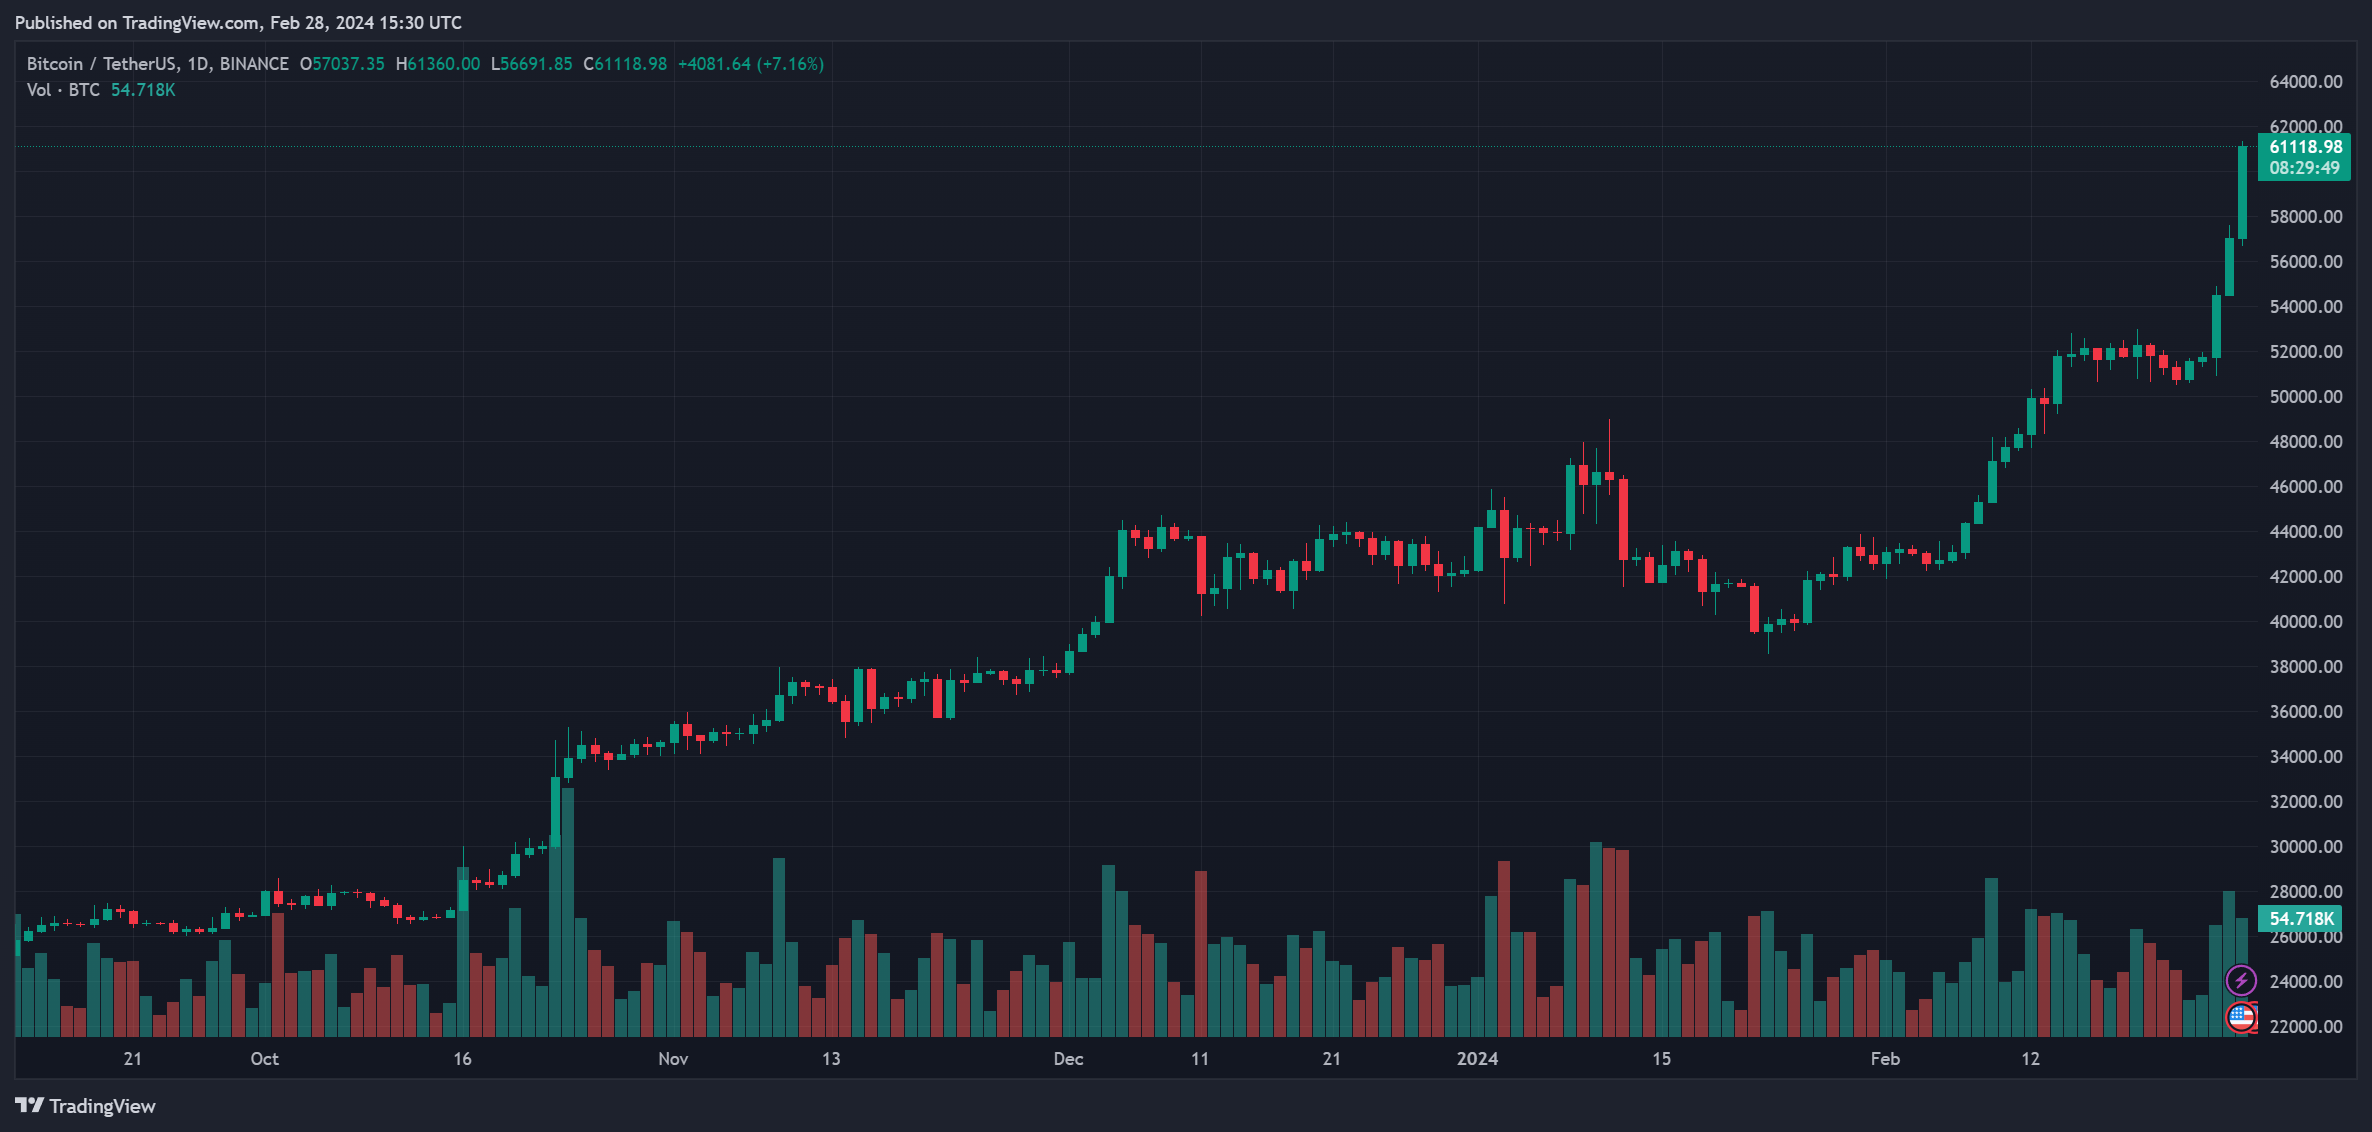 BTC’s price trends to the upside on the daily chart